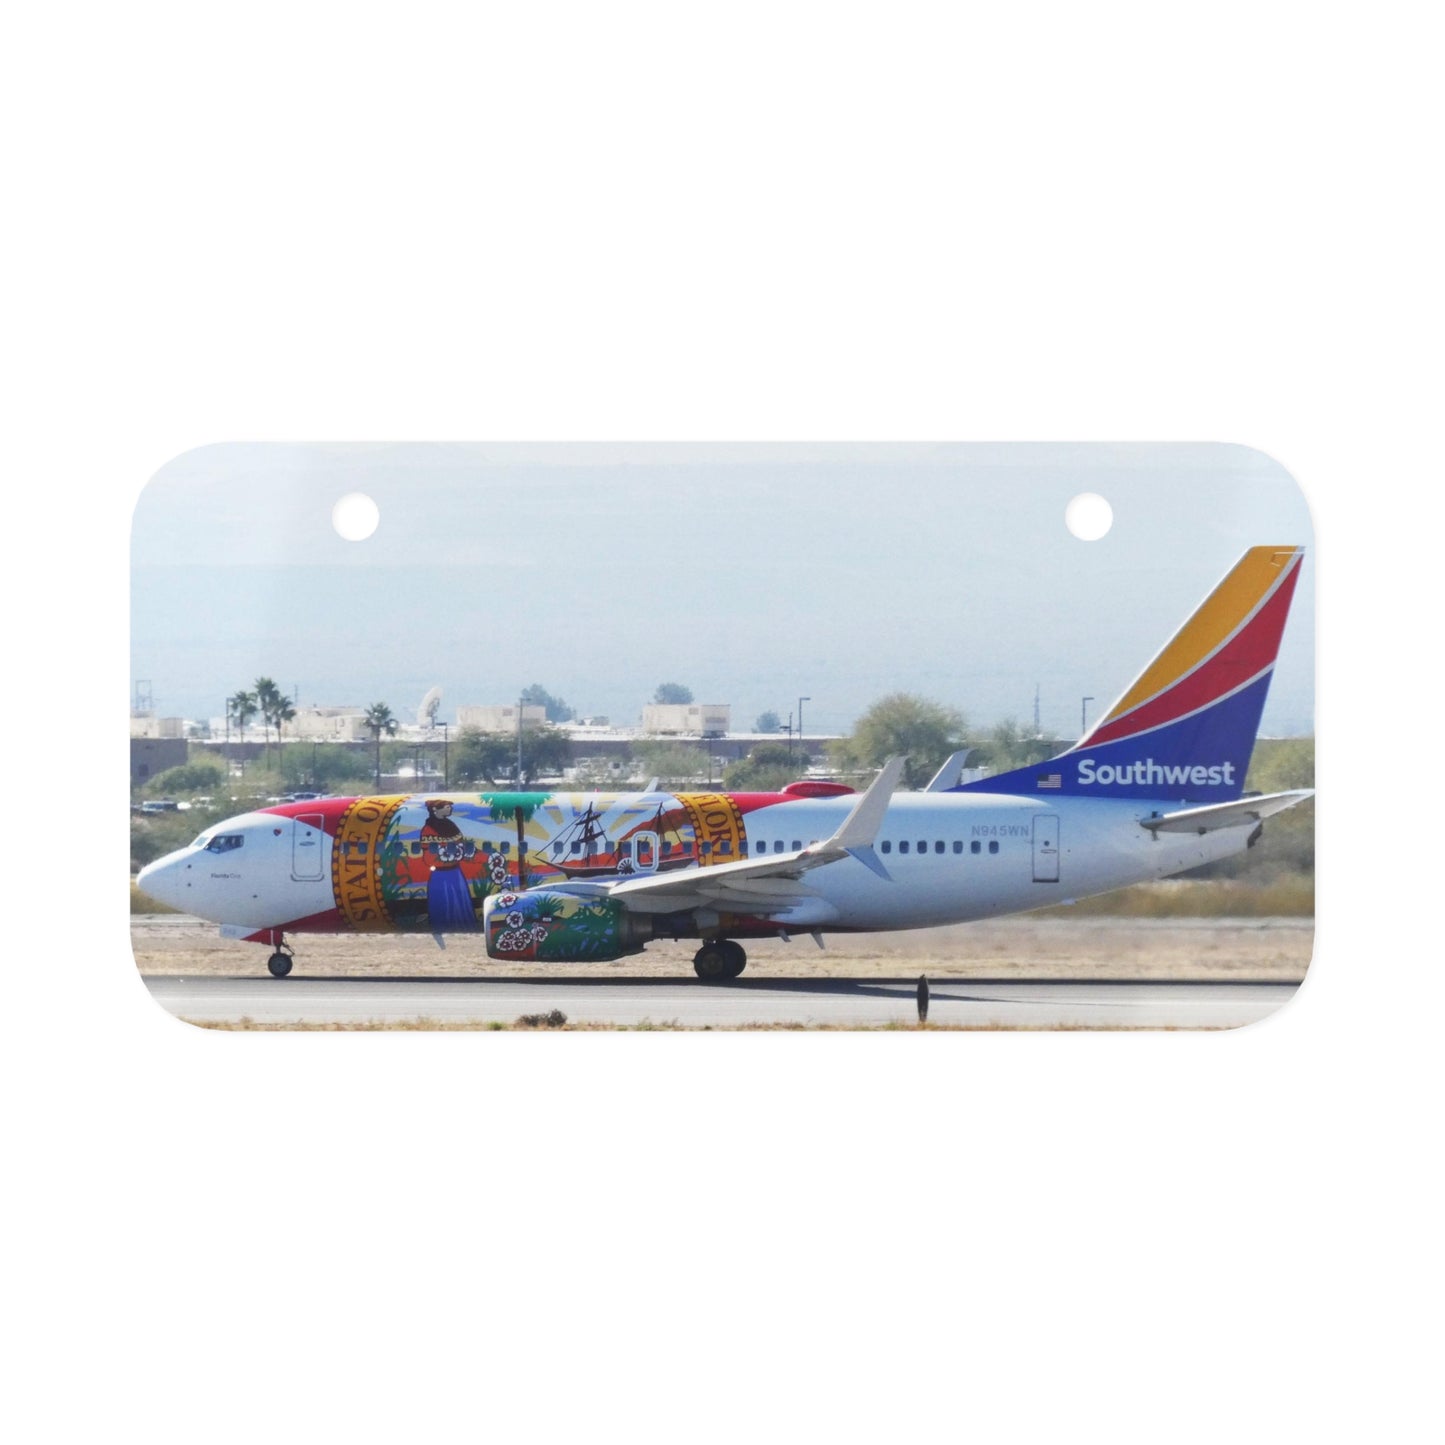 Southwest Airlines "Florida One" Livery Collector's Plate